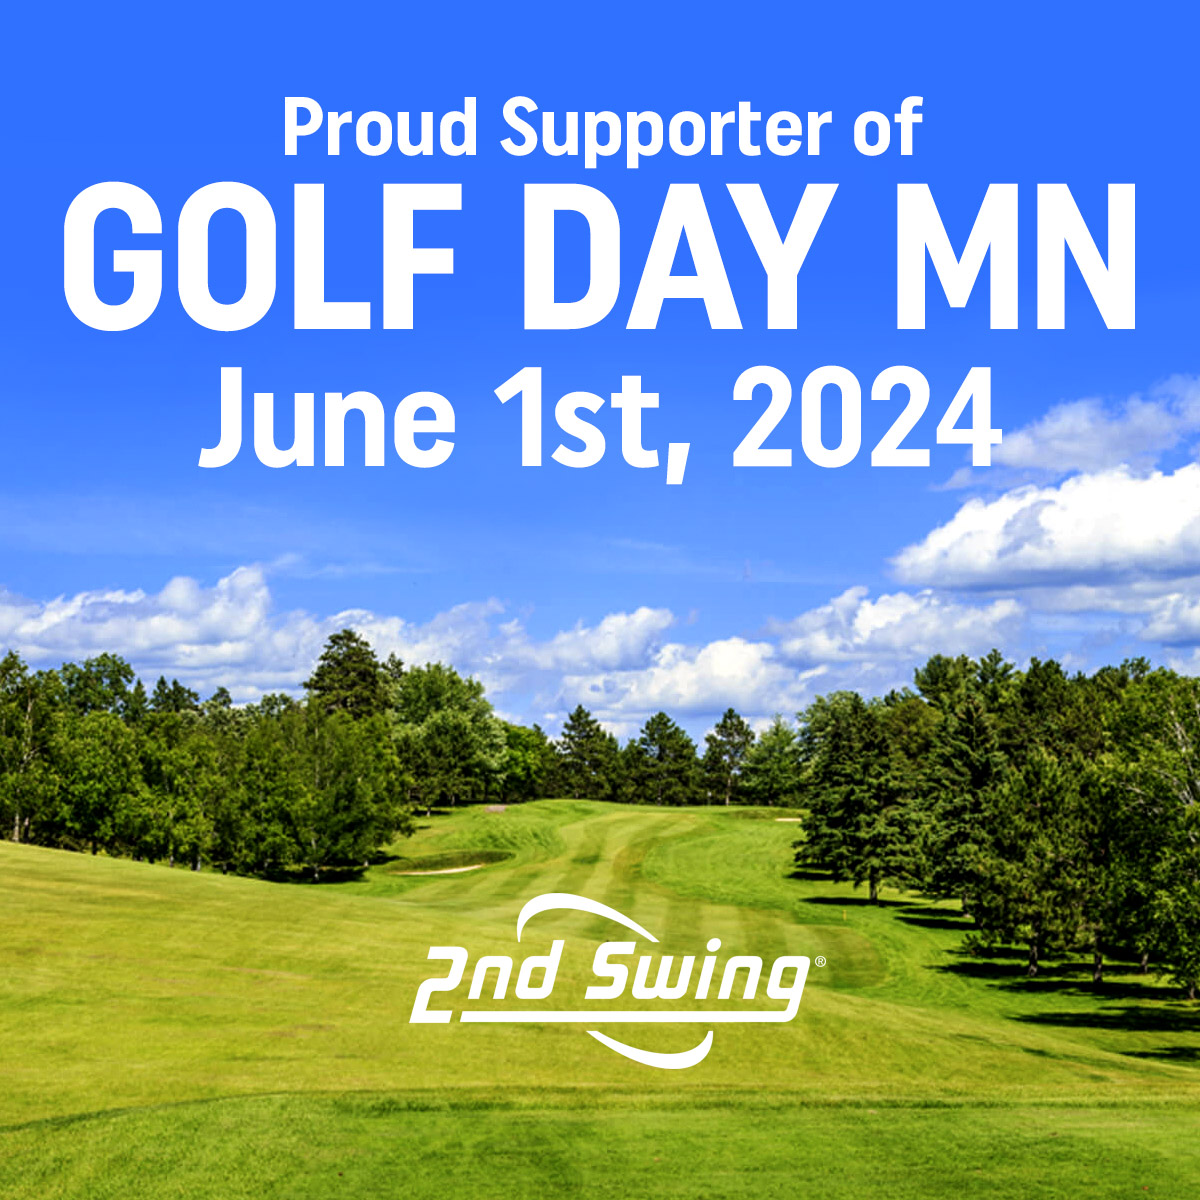 We are just 18 days away from the Inaugural Golf Day Minnesota! We can't wait! Come join us on the course and celebrate the sport we all love! Find a participating course near you here: bit.ly/4dHeM96 #GolfDayMN #2ndswinggolf #golf